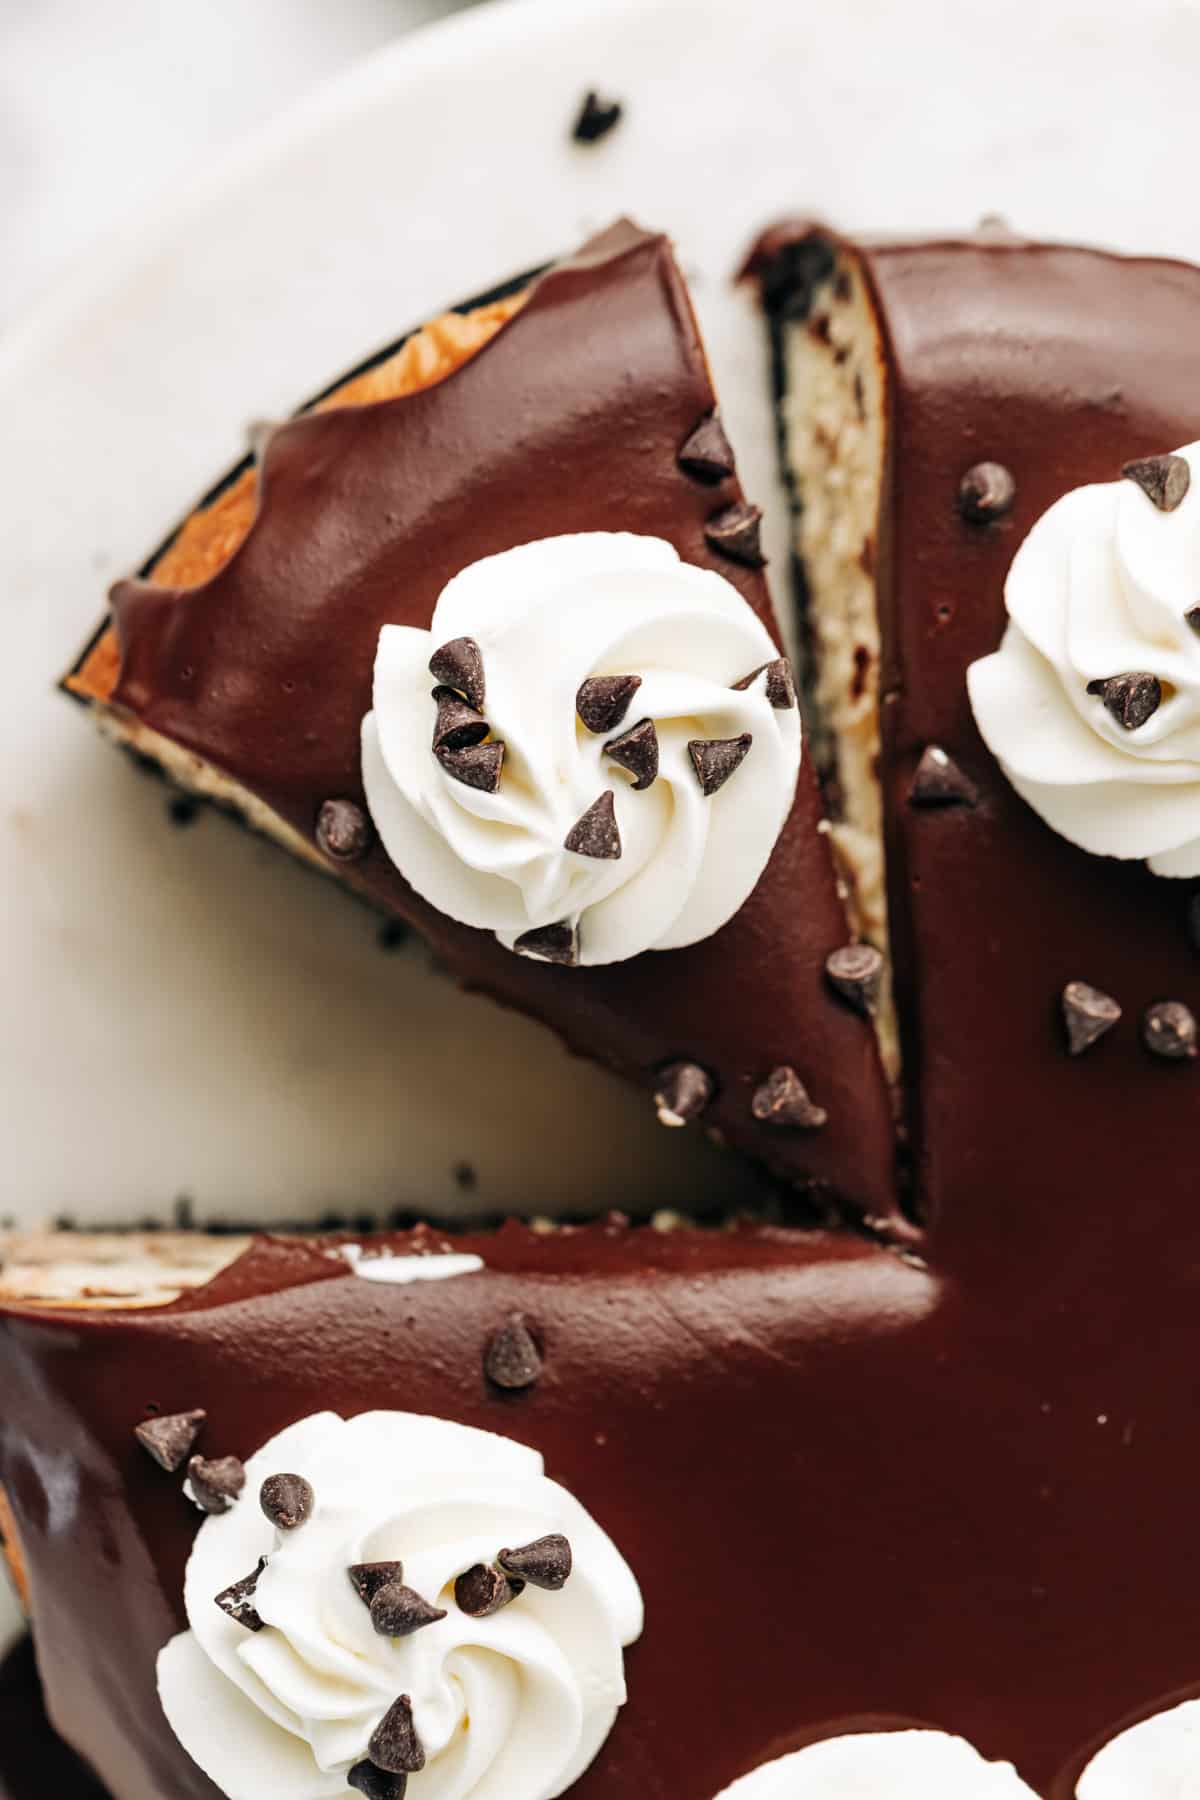 ganache topping on a chocolate chip cheesecake.